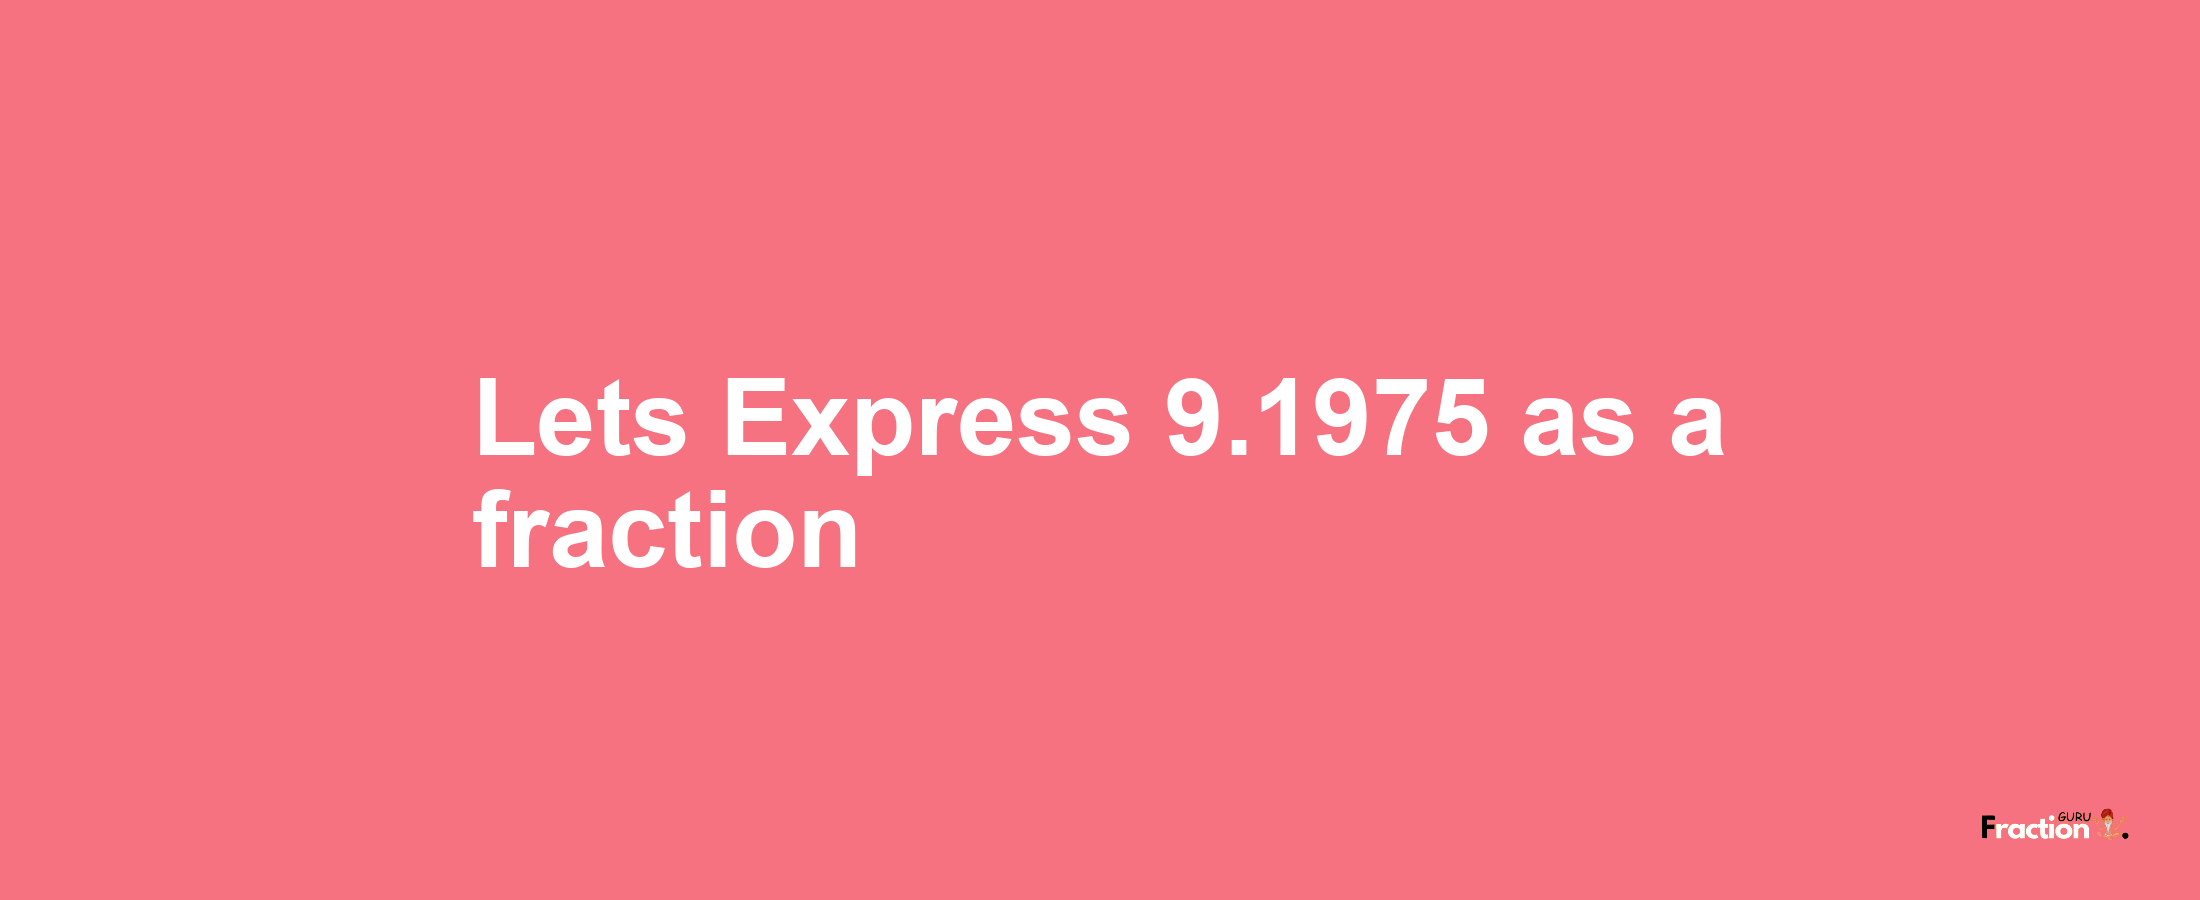 Lets Express 9.1975 as afraction